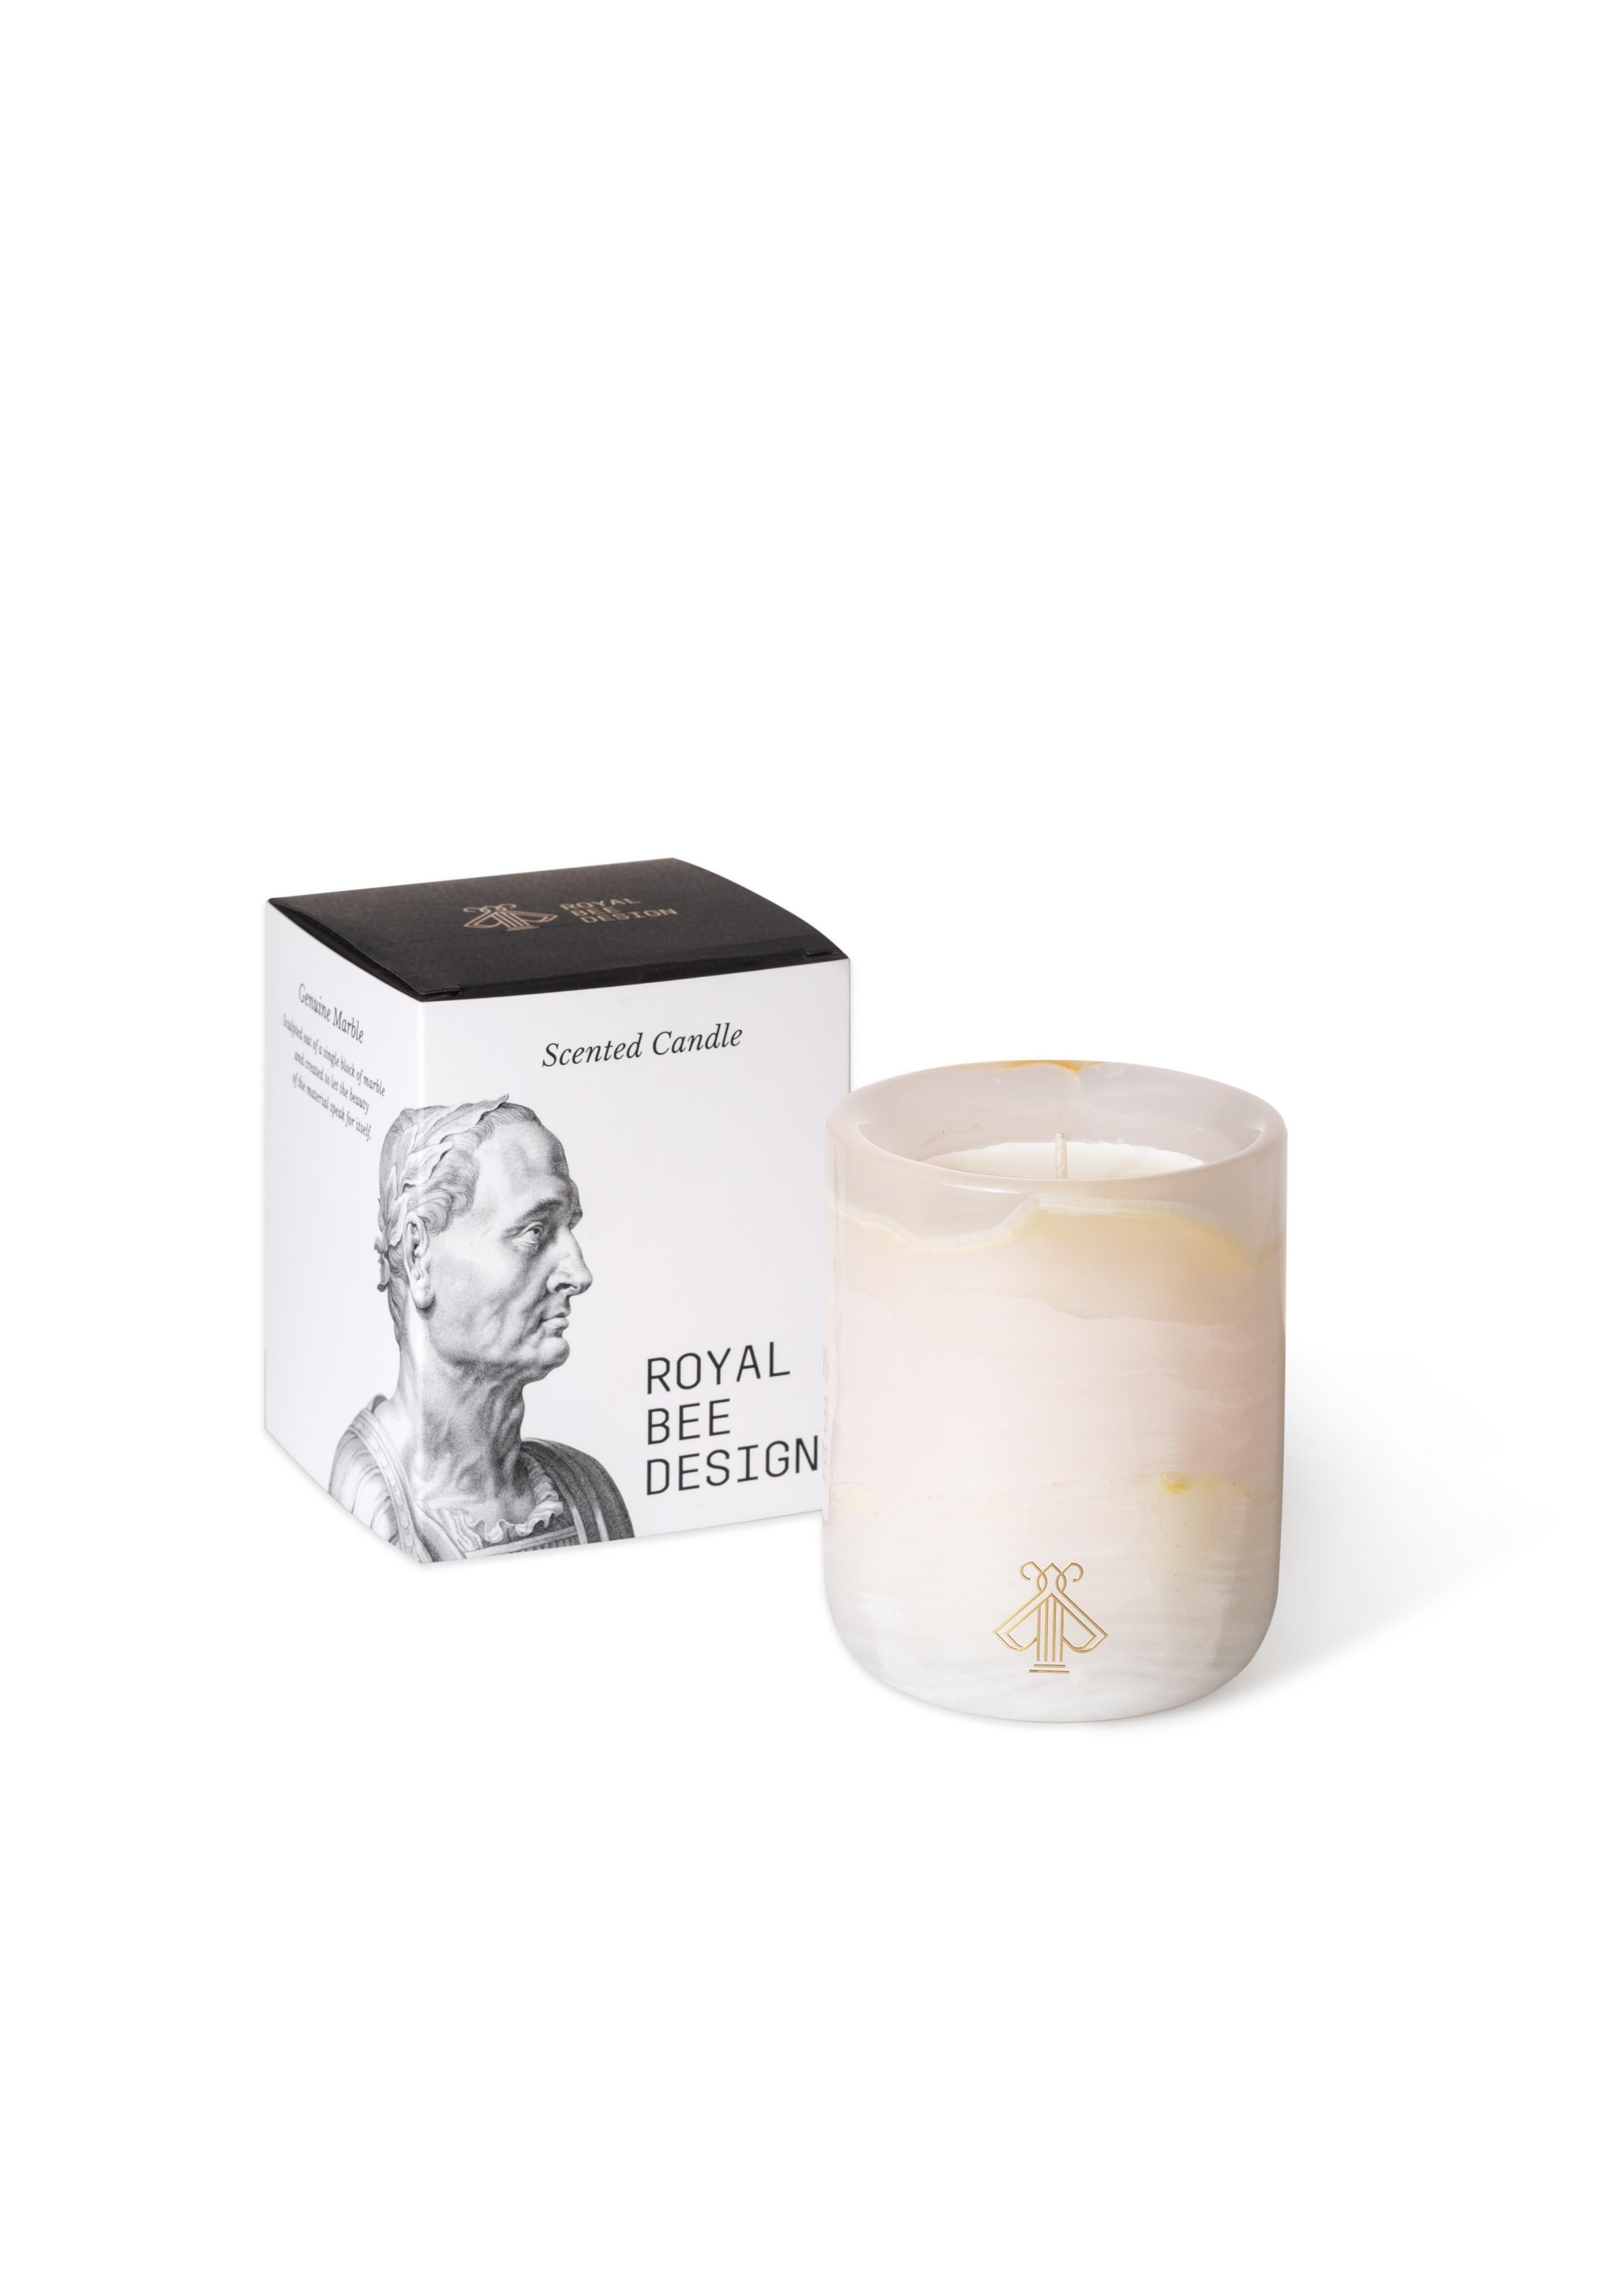 Praised by the Greeks, Egyptians, and Romans since ancient times, onyx is a soft stone symbolizing elegance, finesse, and immaculate whiteness. The true beauty is held within the unique glow each onyx candle provides once lit, showing off the